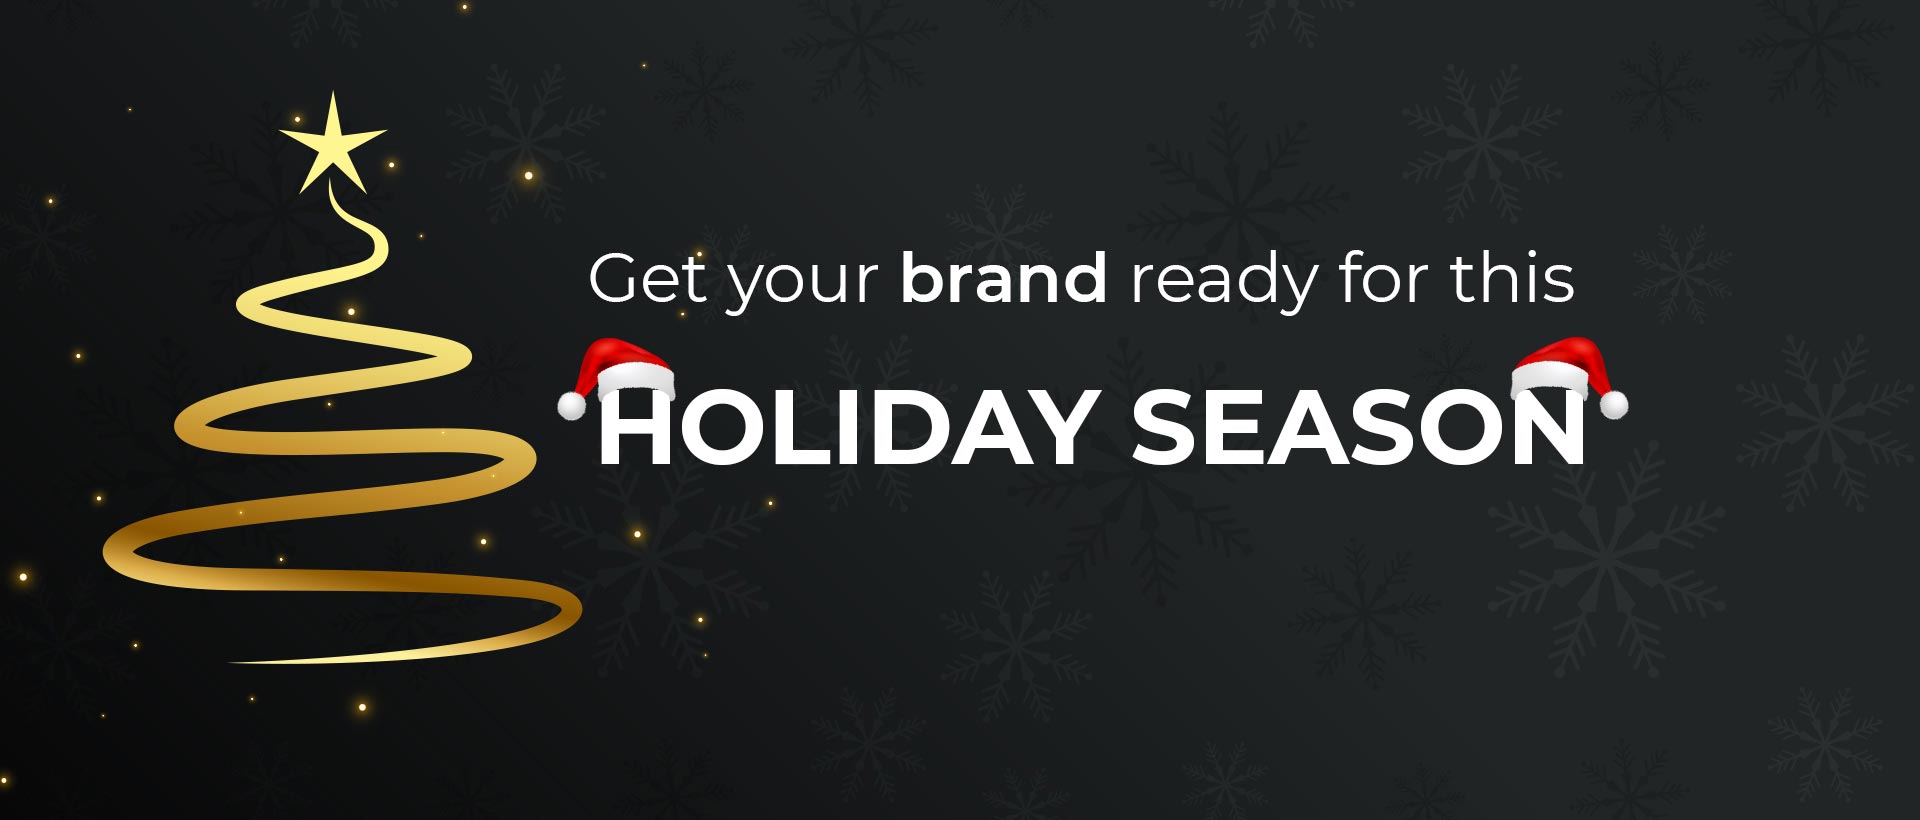 Get your brand ready for this holiday season